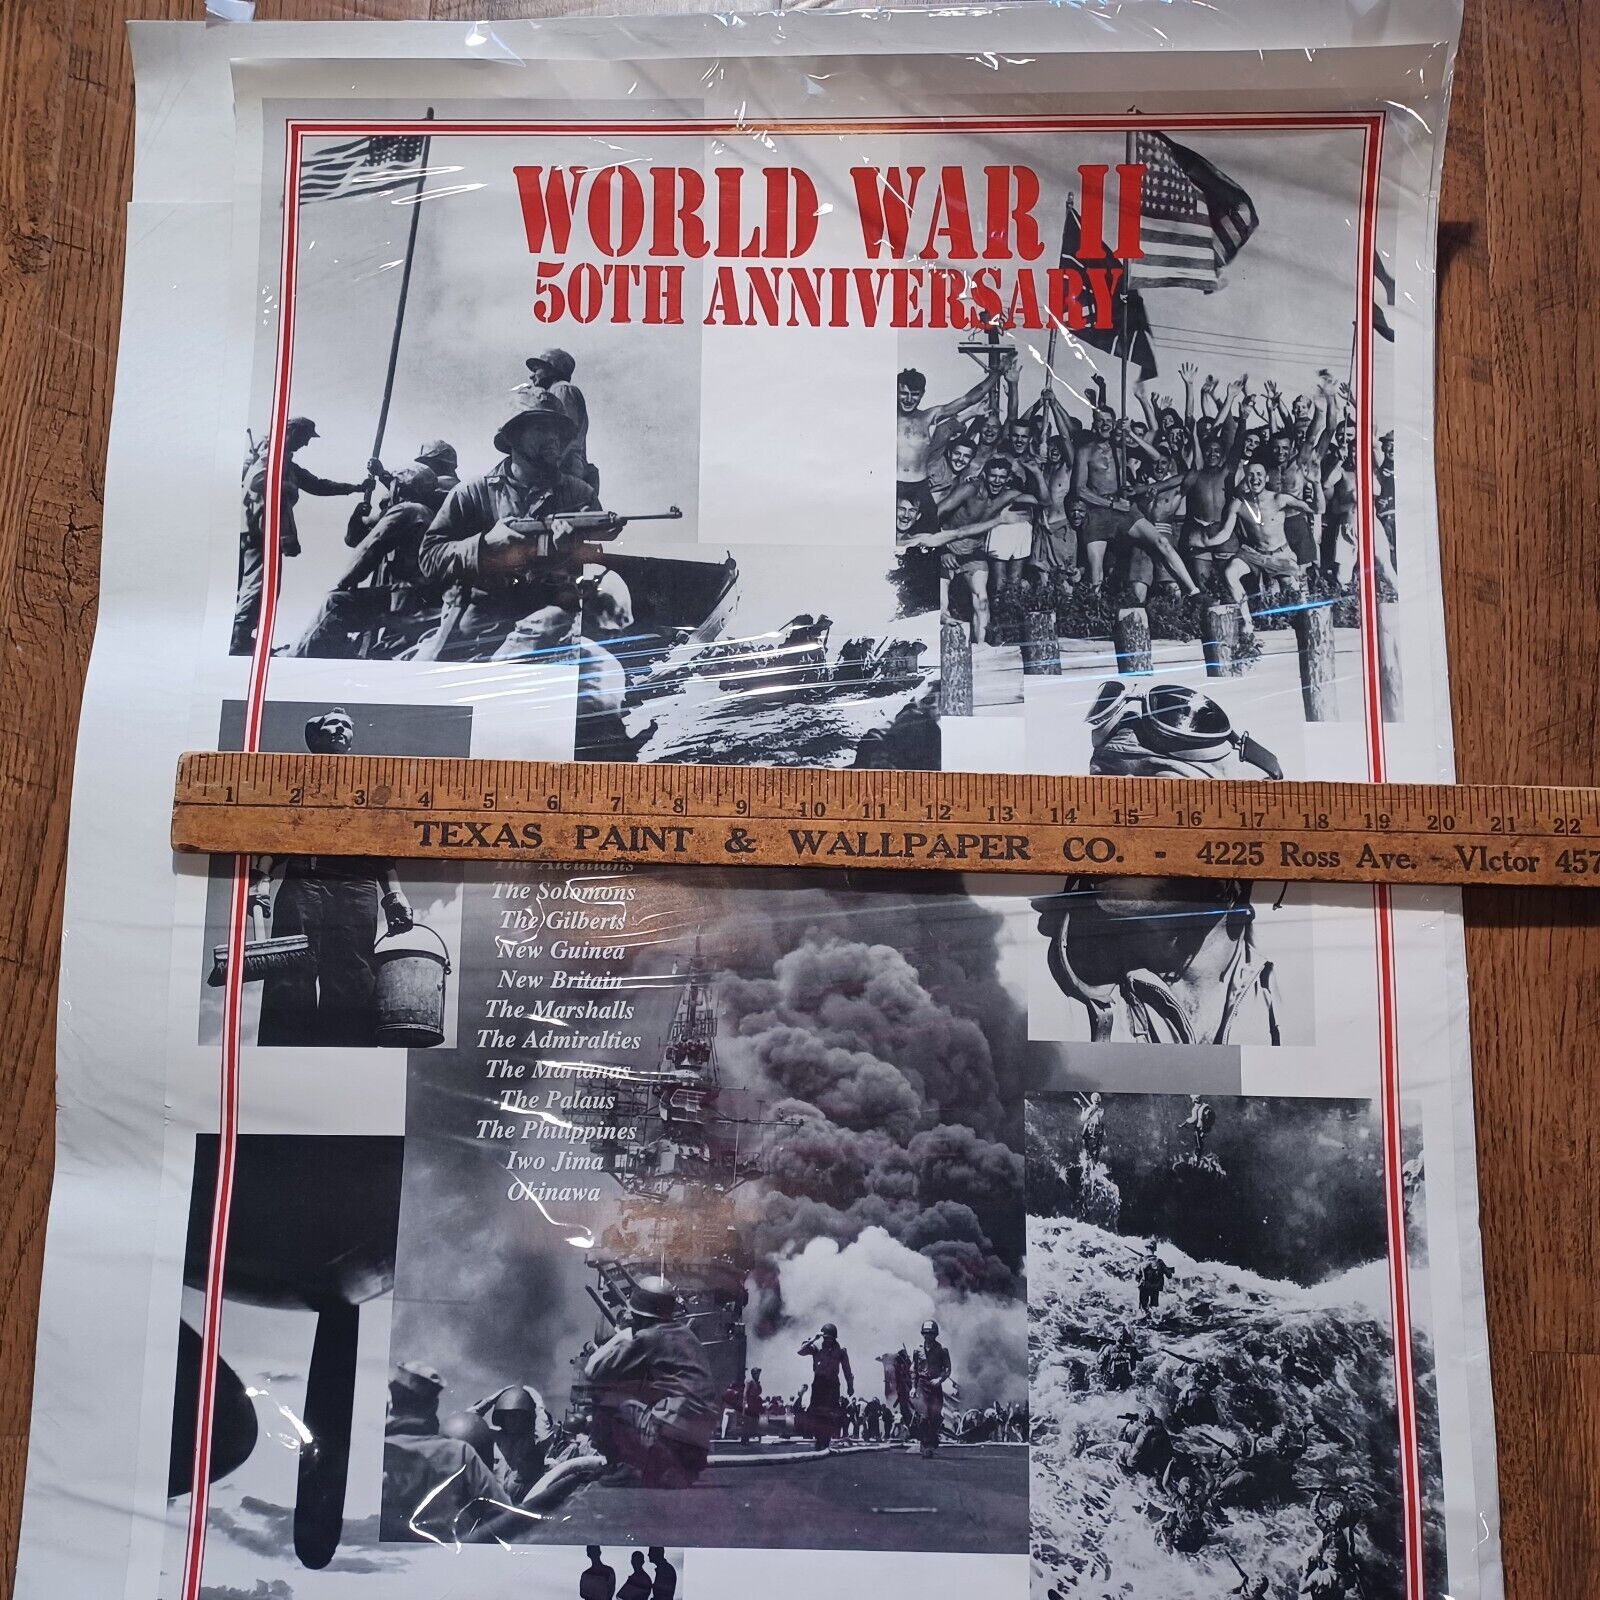 1995 50TH ANNIVERSARY OF WIRLD WAR 2 VICTORY IN THE PACIFIC POSTER Без бренда - фотография #9